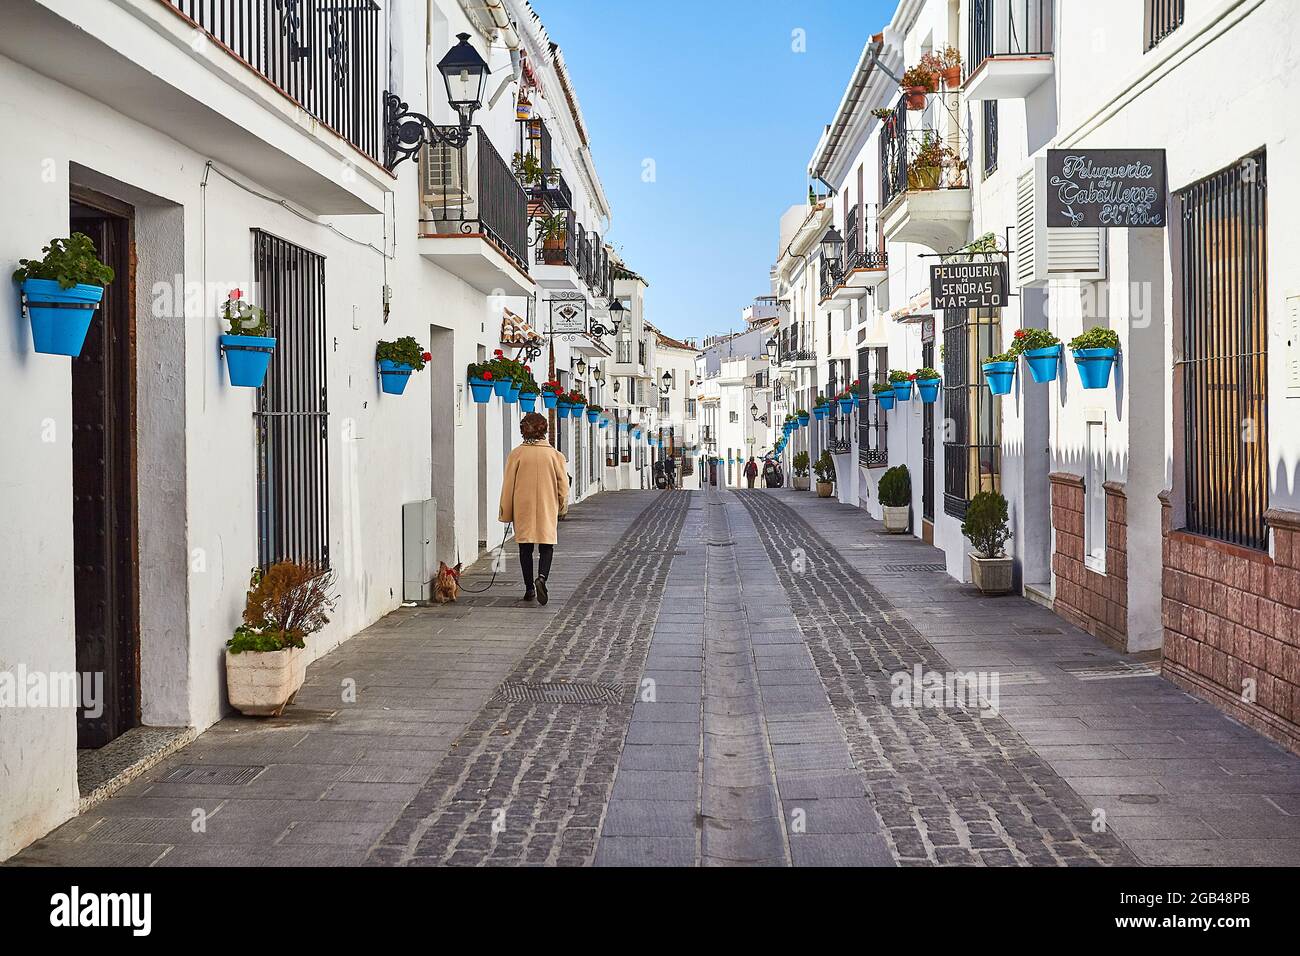 Picturesque street of Mijas with a lady walking a dog. Andalusian white town. Costa del Sol. Southern Spain Stock Photo